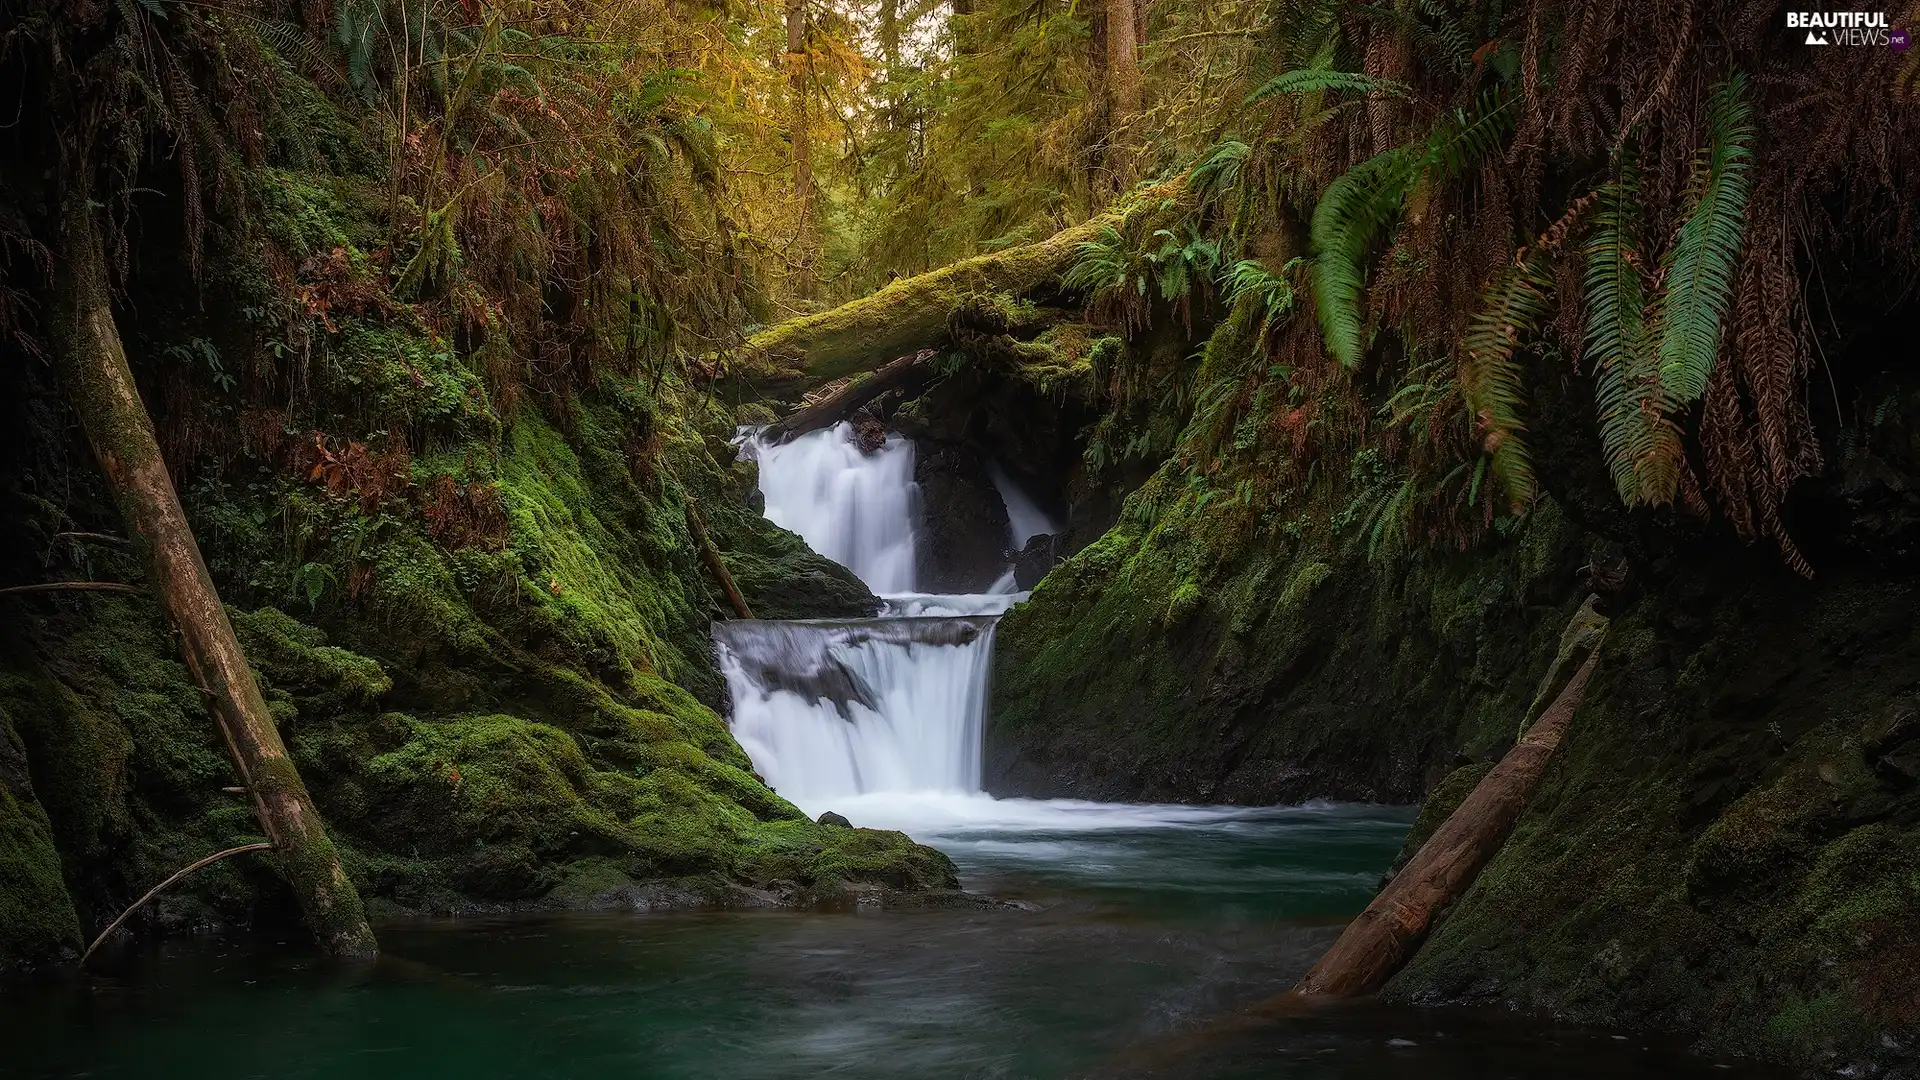 Stones, mossy, Olympic National Park, viewes, trees, Washington State, Logs, waterfall, The United States, fern, forest, River